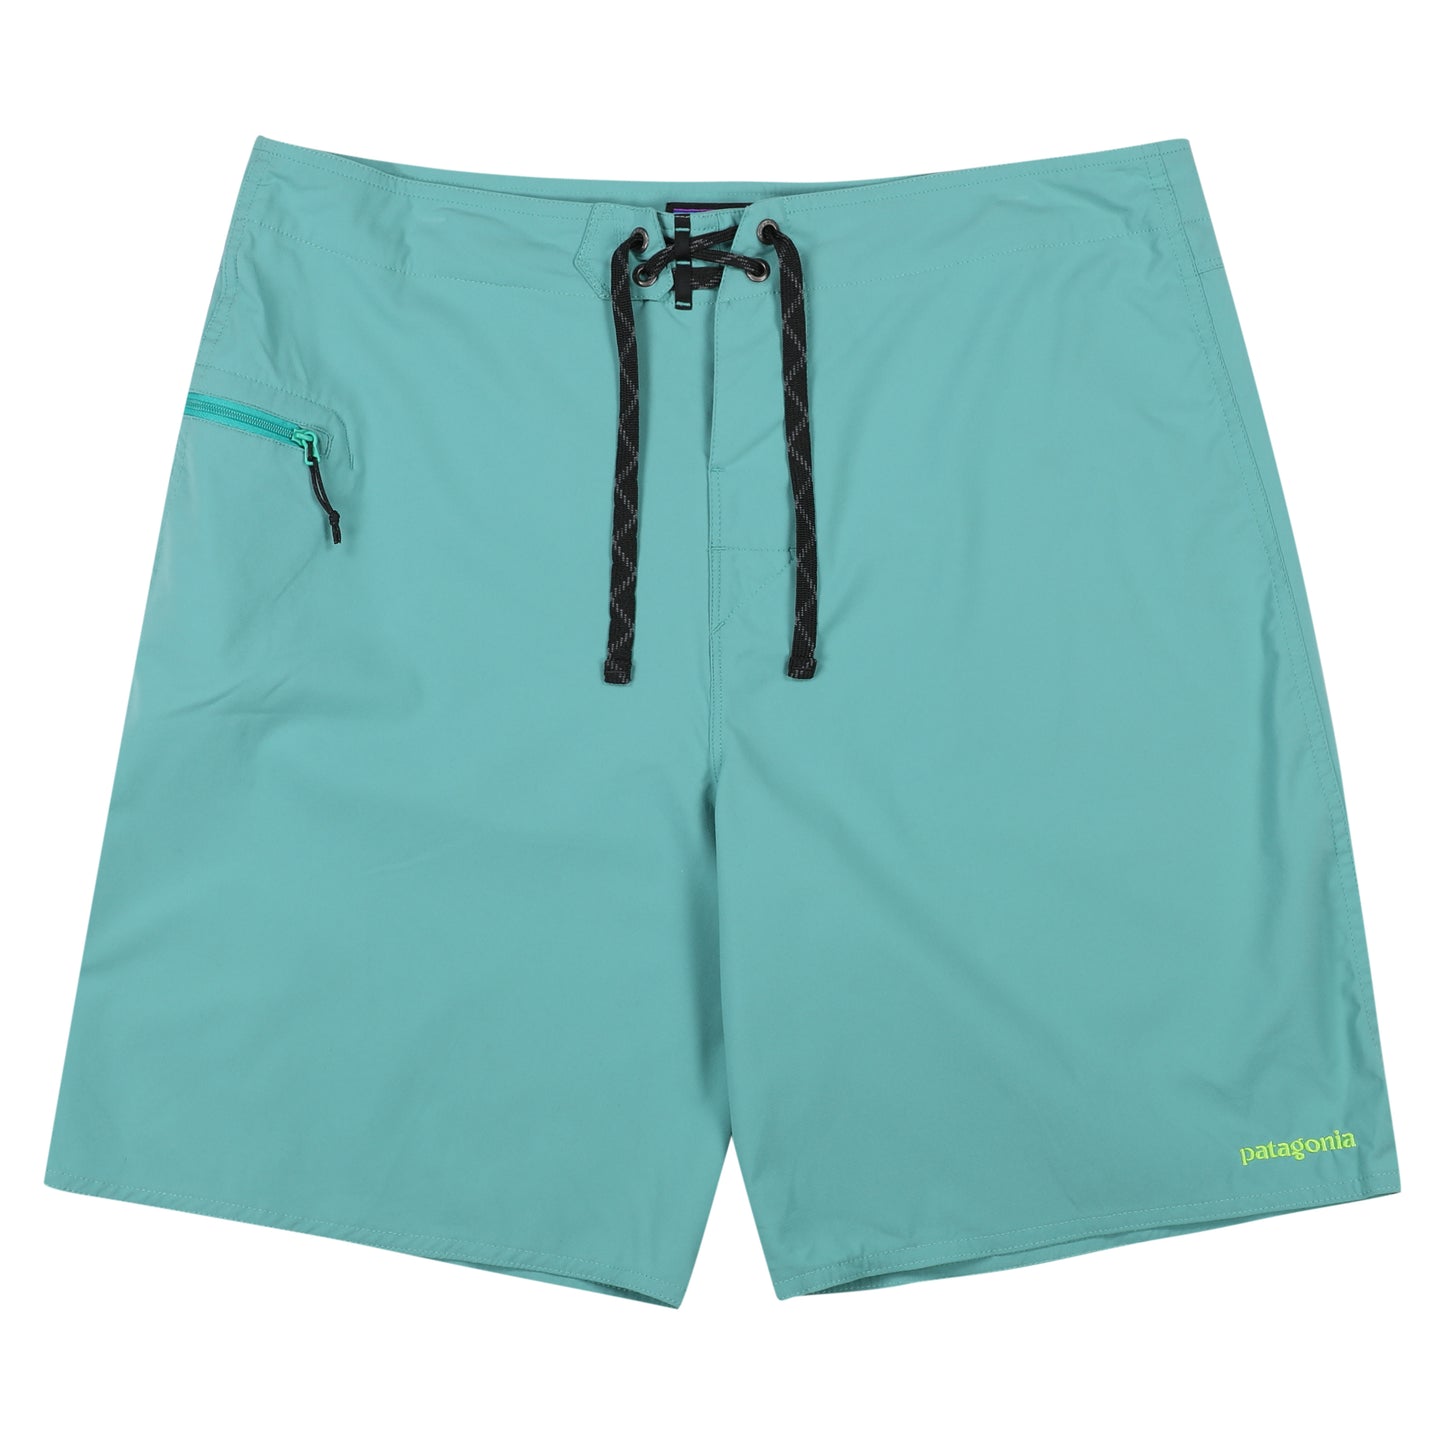 M's Stretch Planing Board Shorts - 20""